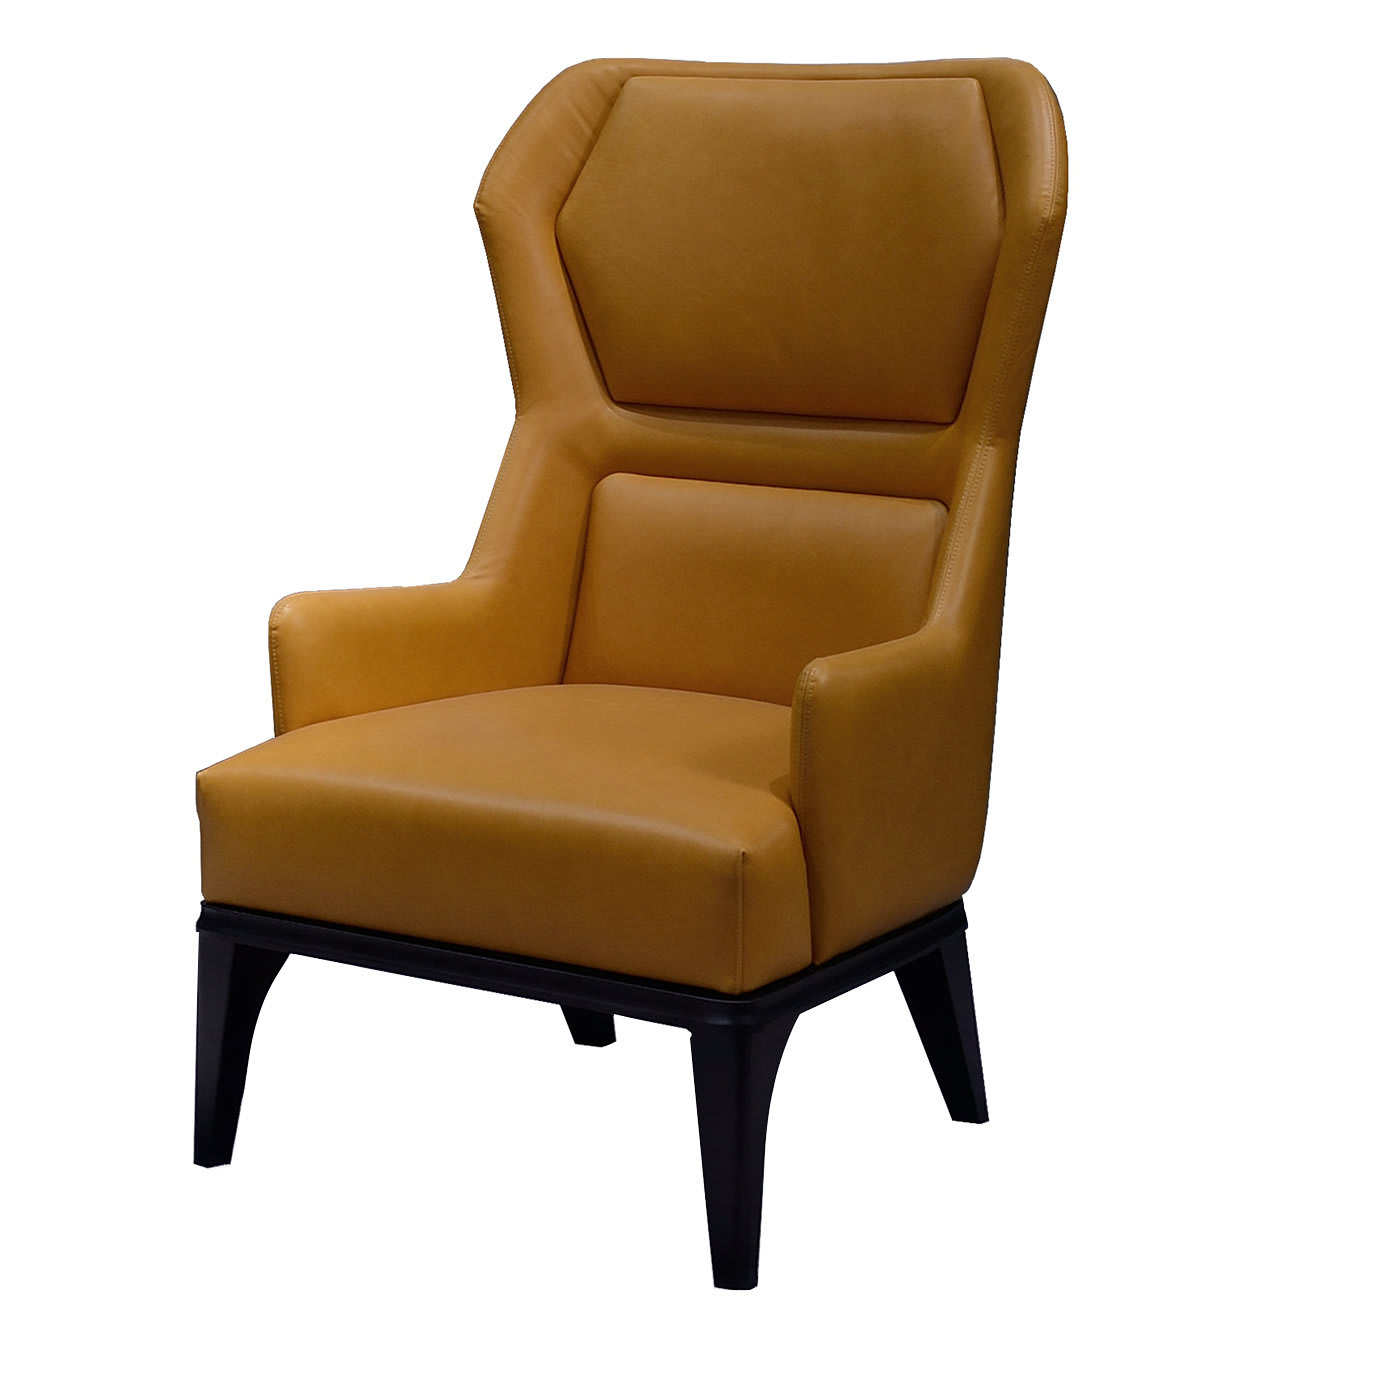 Relax Armchair 2019 Yellow Leather - Carpanelli